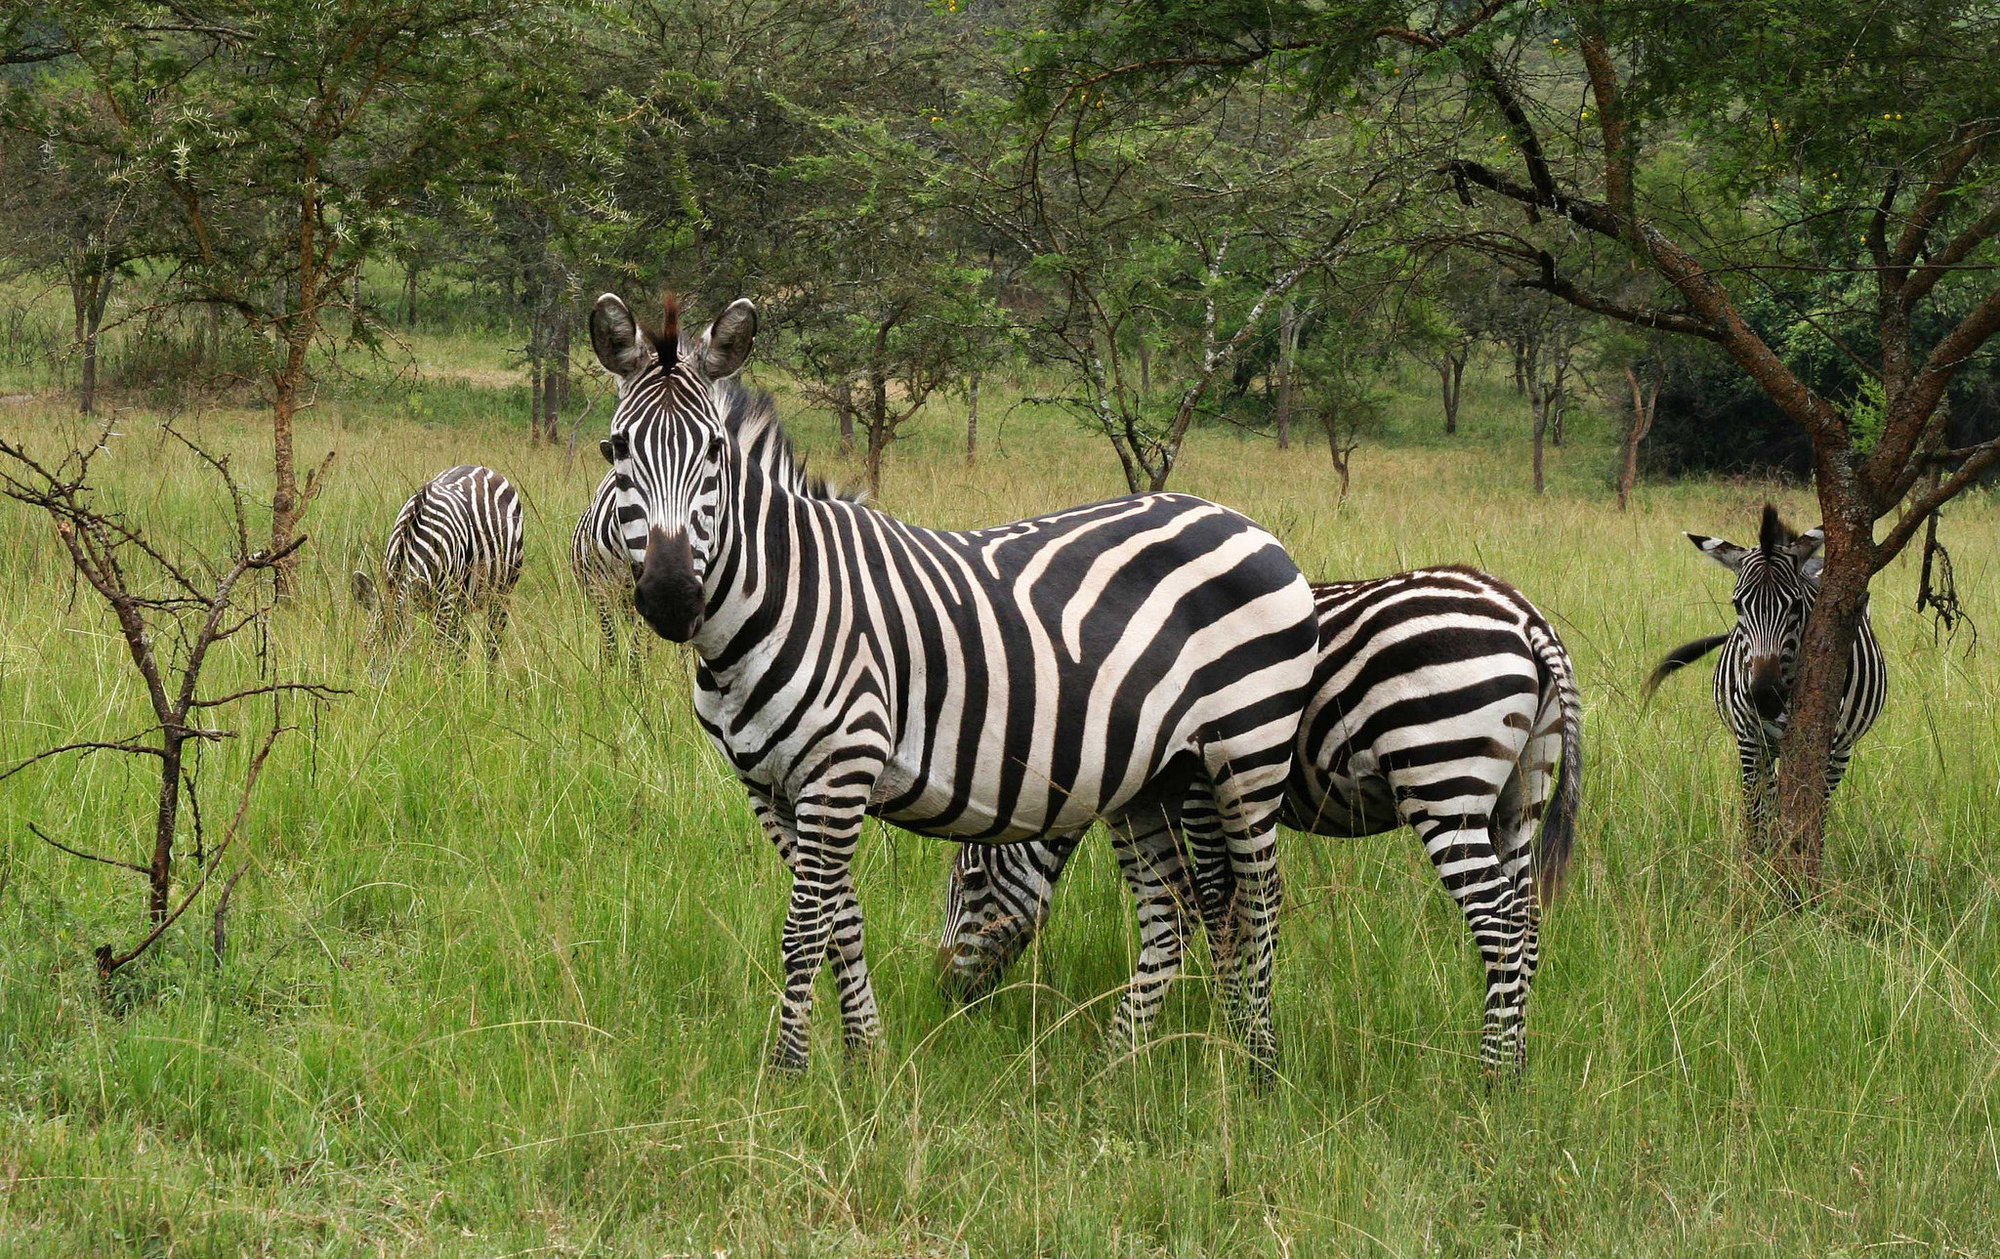 So you think that zebras are white with black stripes right? Wrong! Officially they are actually black with white stripes.